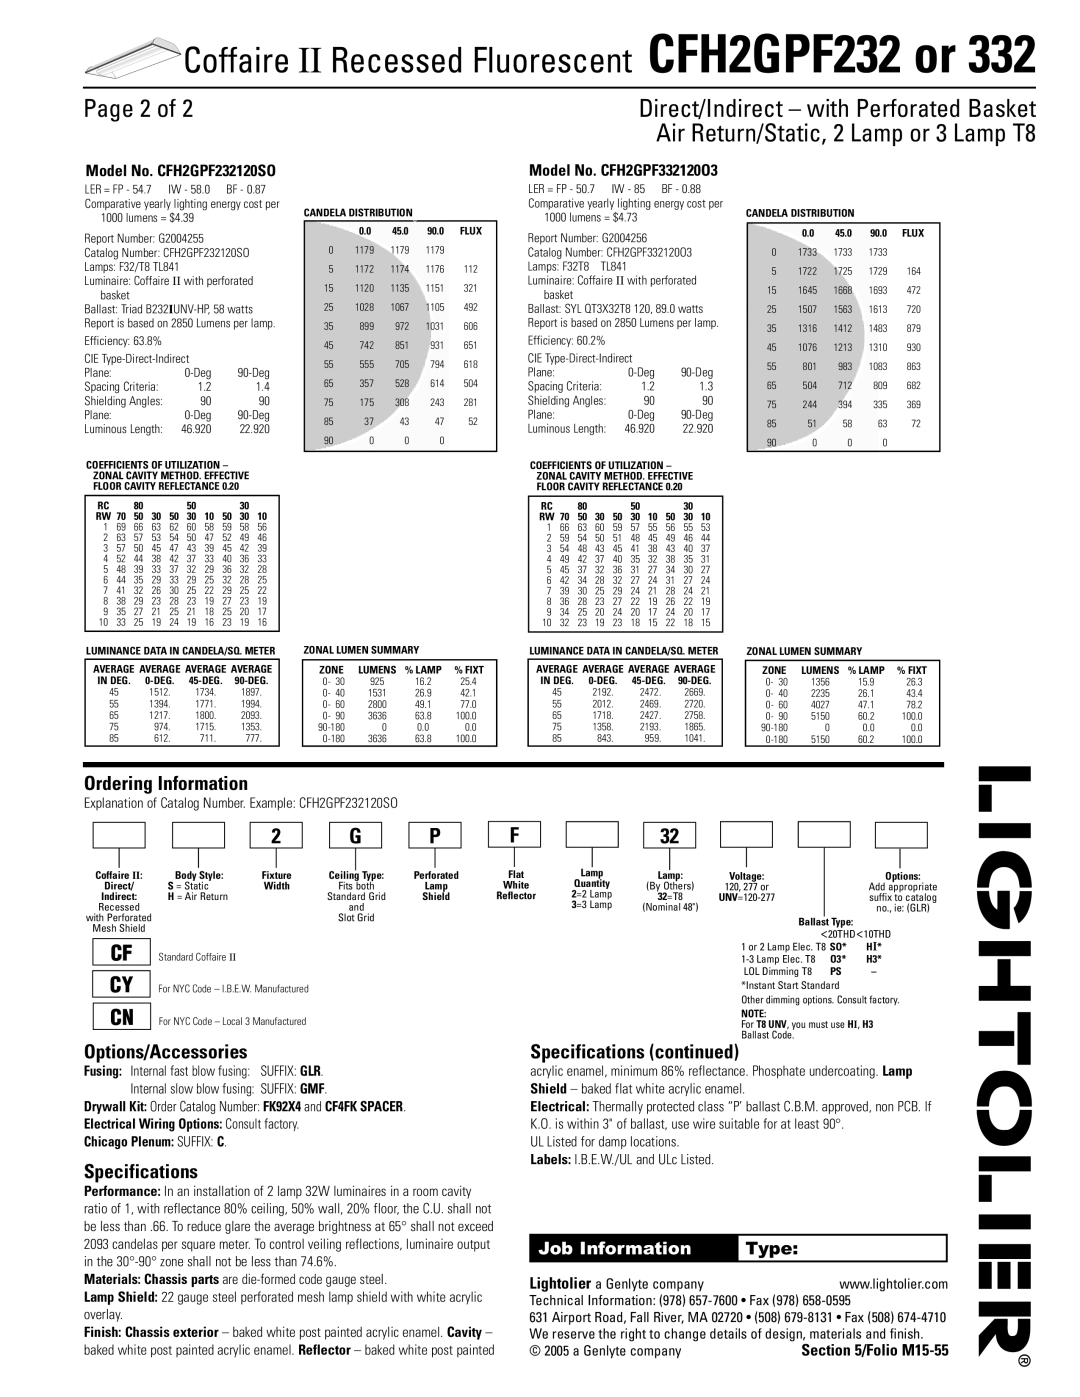 Lightolier CFH2GPF332 Page 2 of, Ordering Information, Options/Accessories, Specifications continued, Folio M15-55 